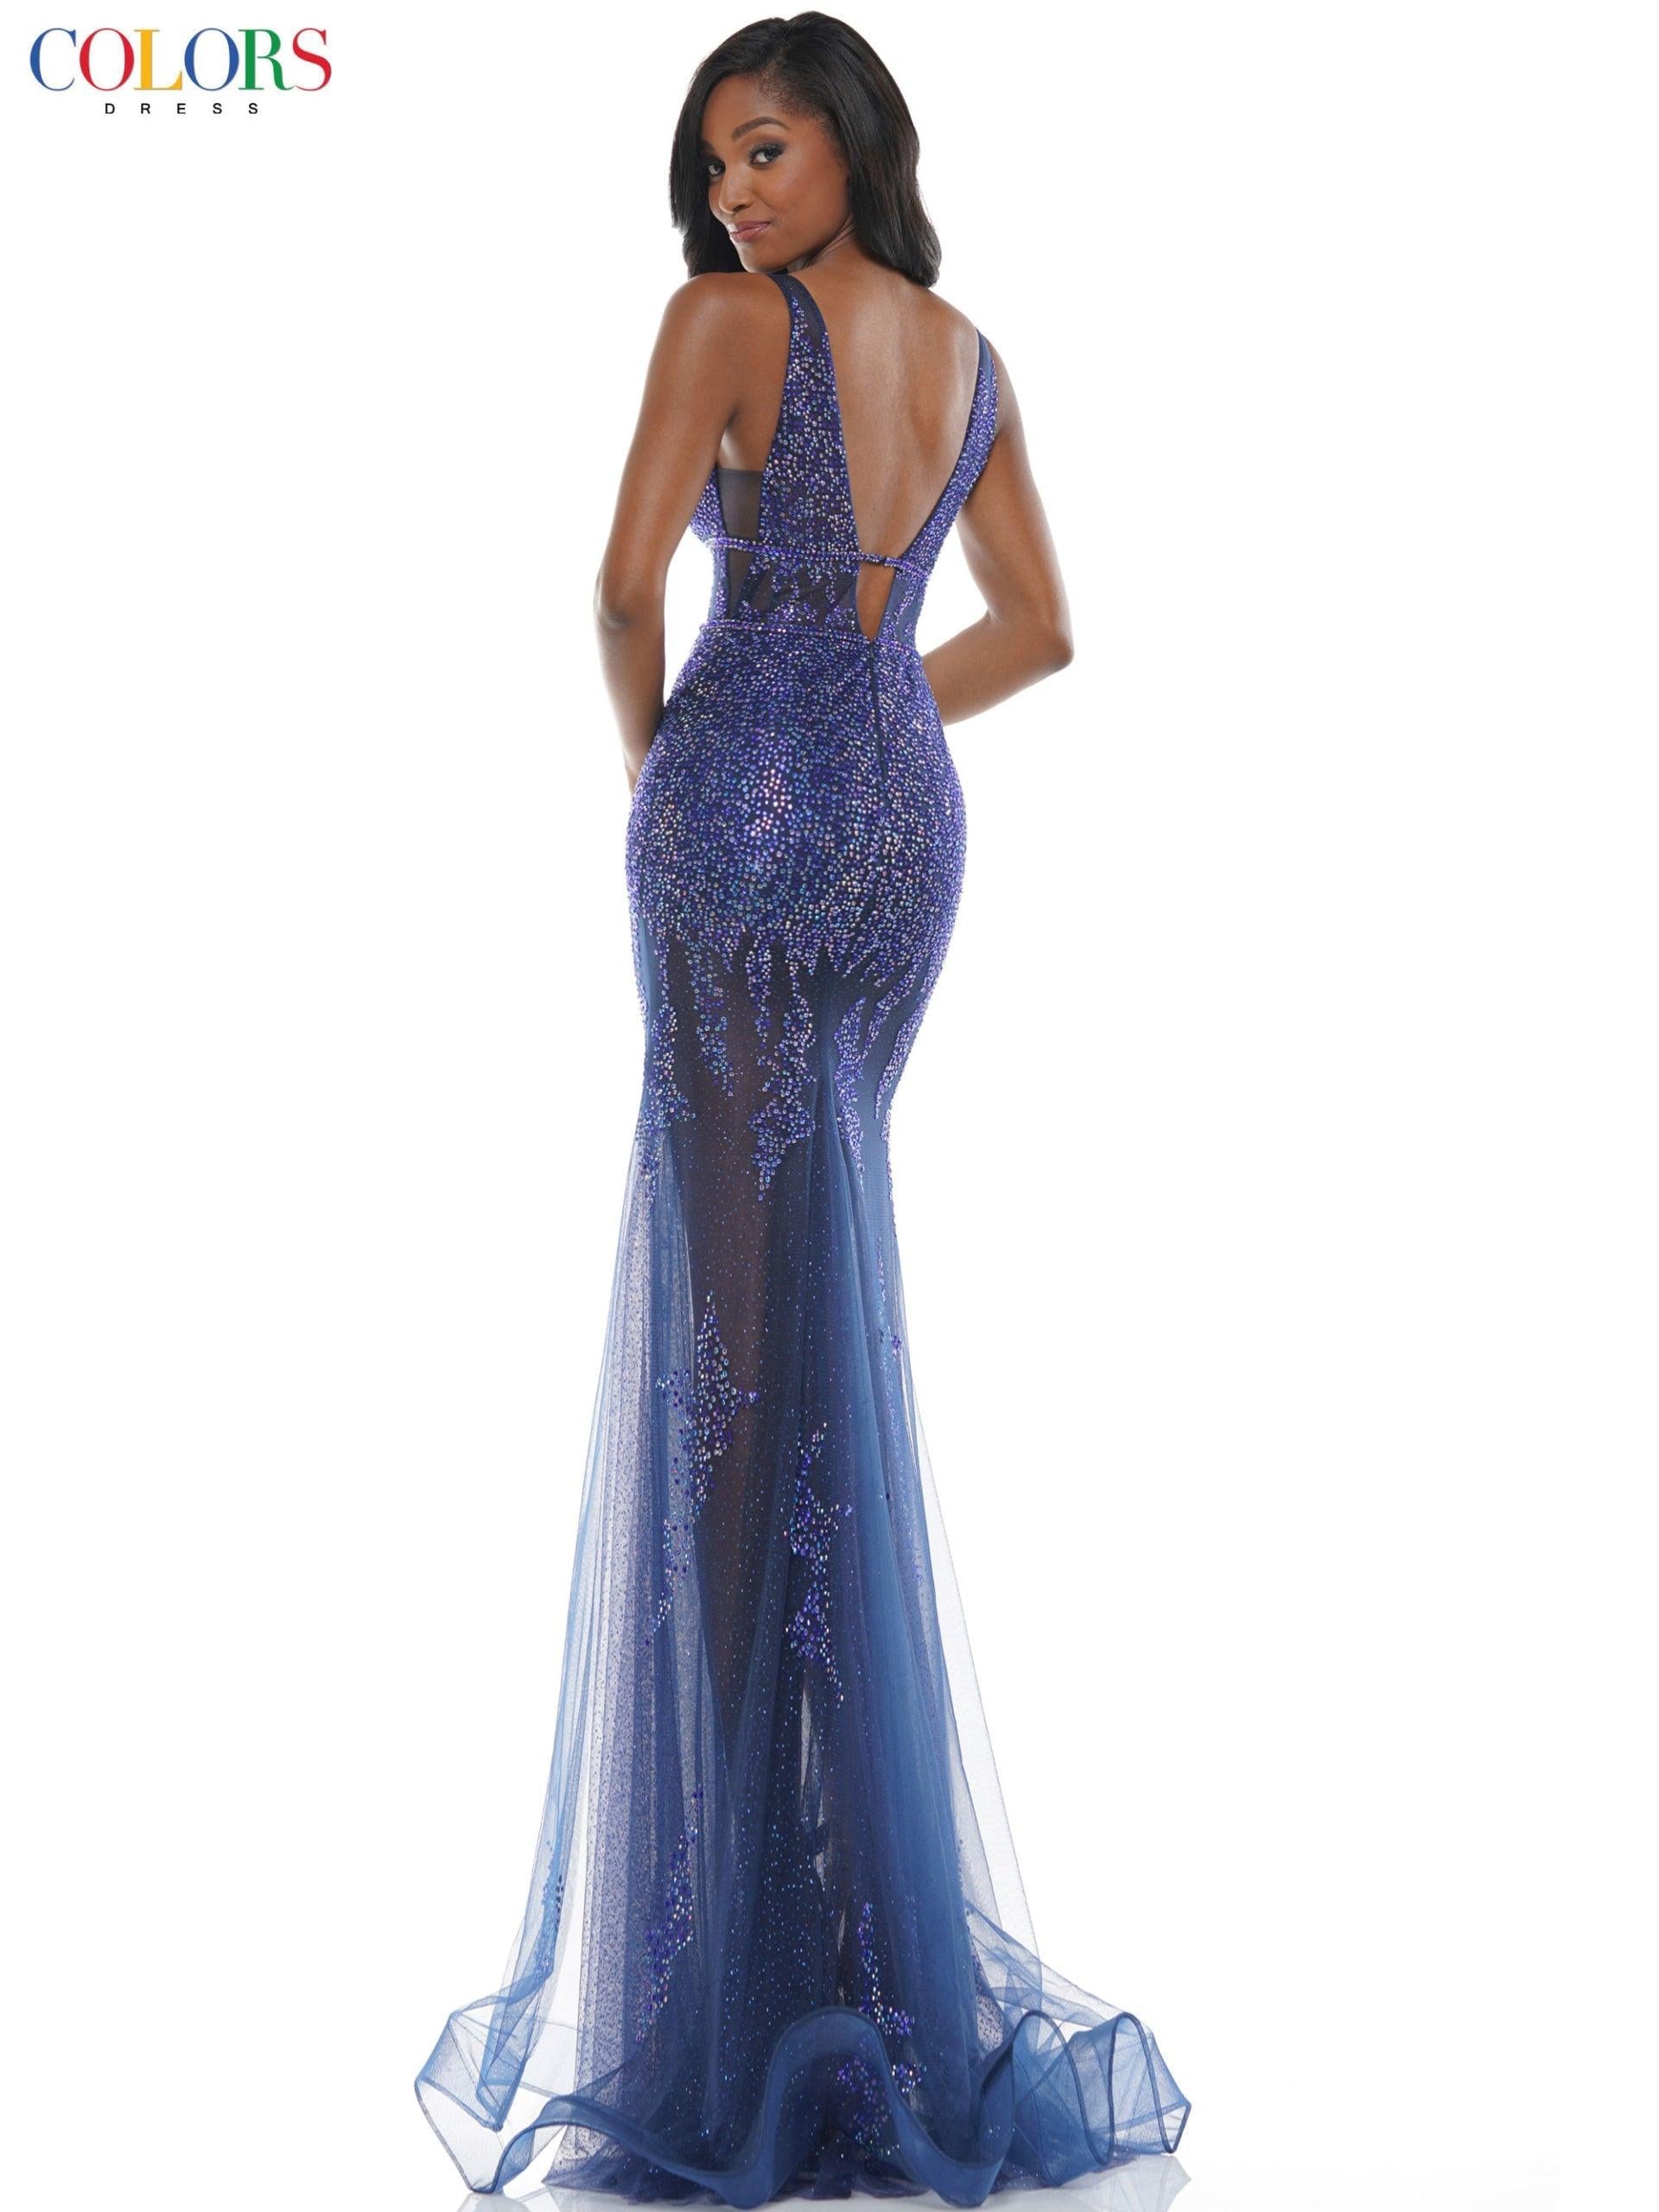 Colors Long Formal Sleeveless Prom Gown 2563 - The Dress Outlet